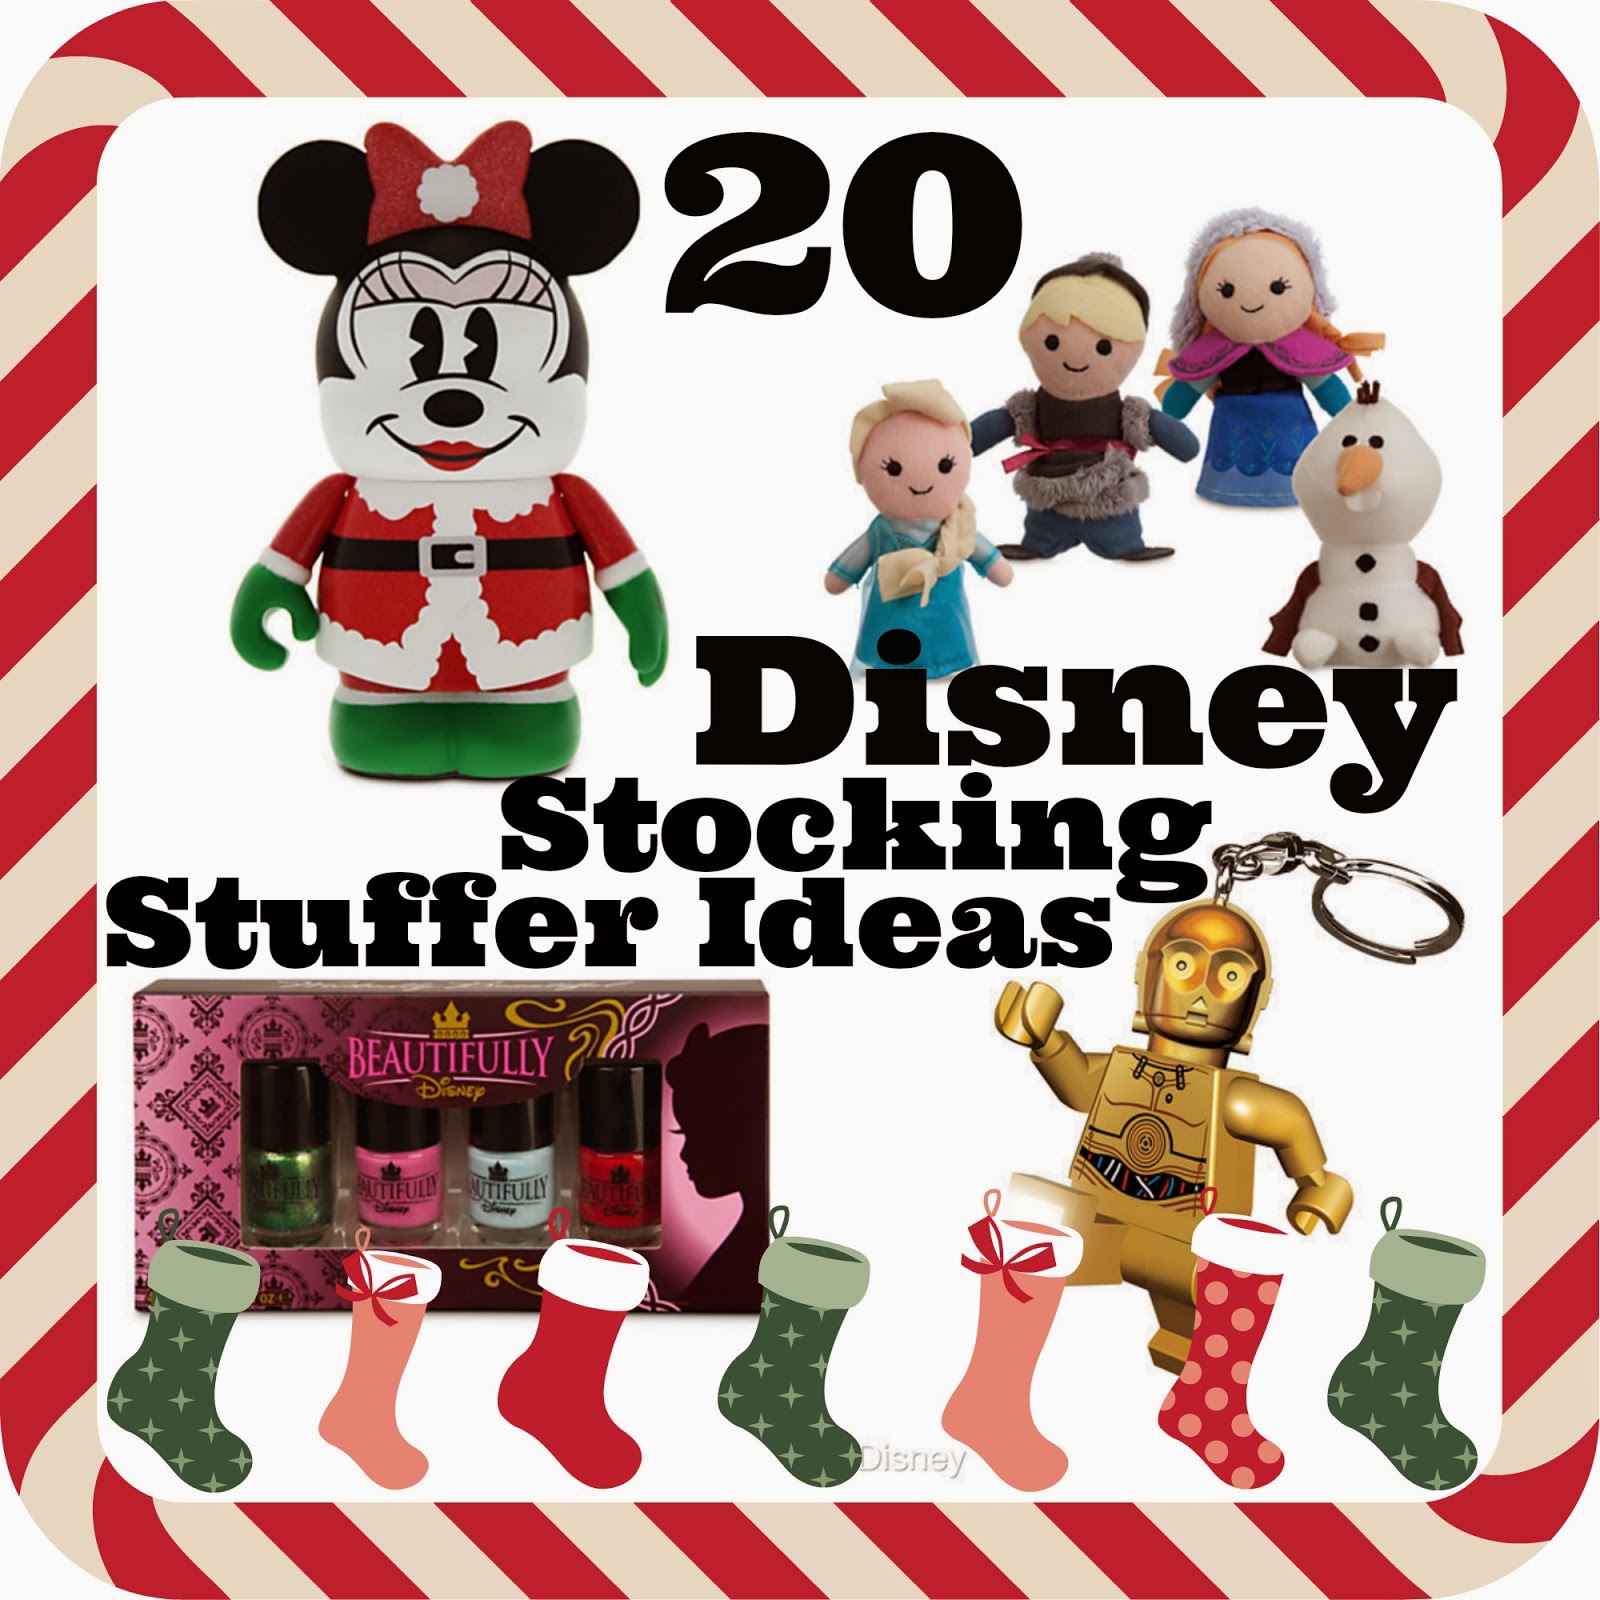 Disney Sisters: Great Gift Ideas for Disney Lovers